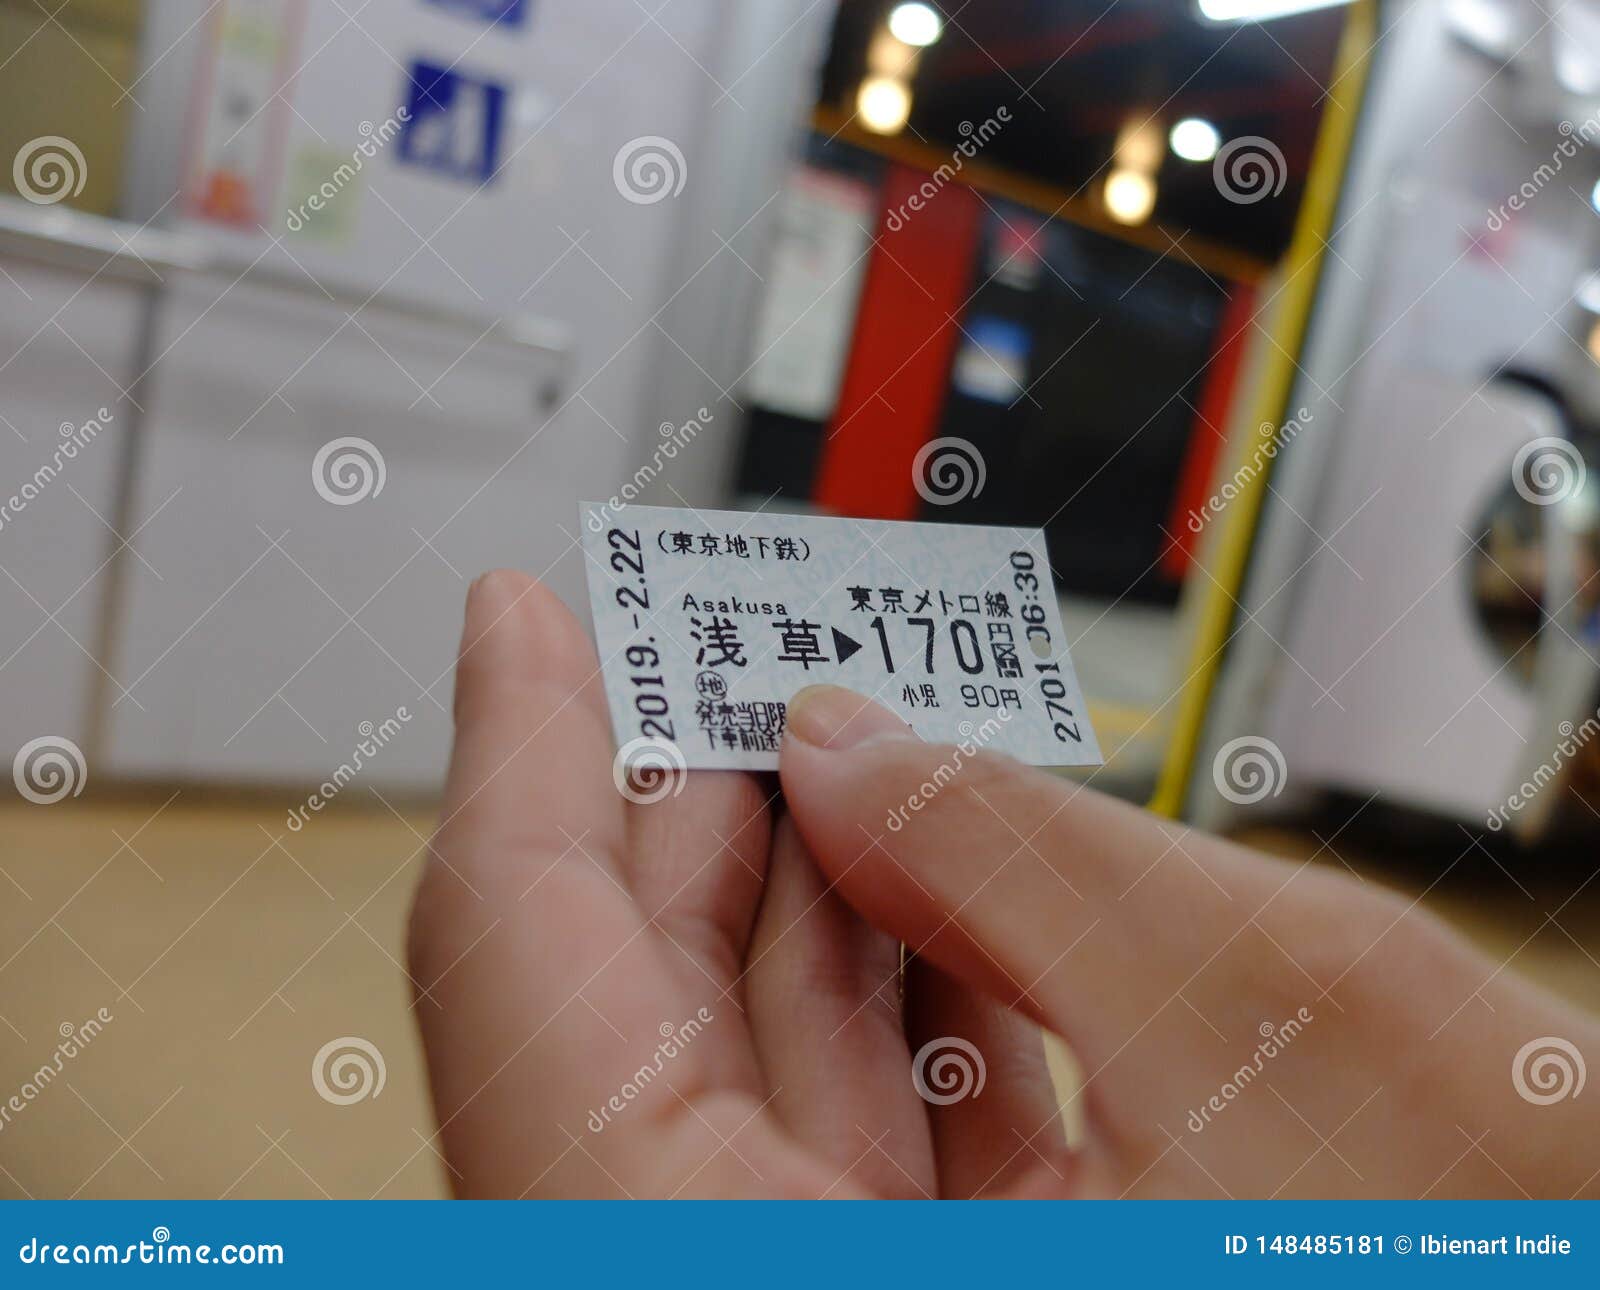 Subway tickets in Japan stock image. Image of ticket - 148485181